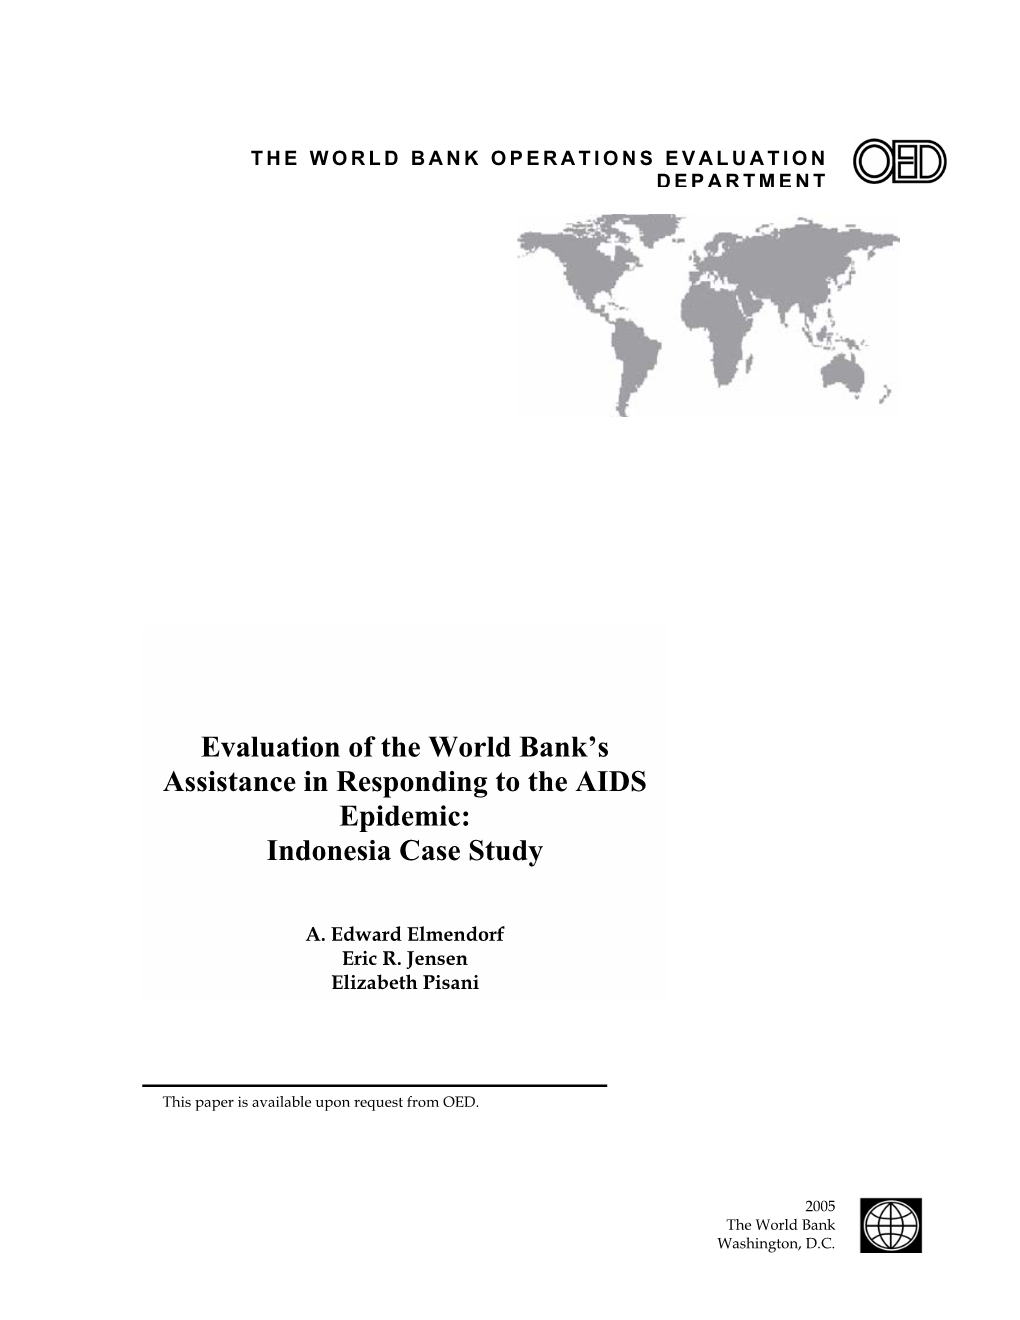 Evaluation of the World Bank's Assistance in Responding to The